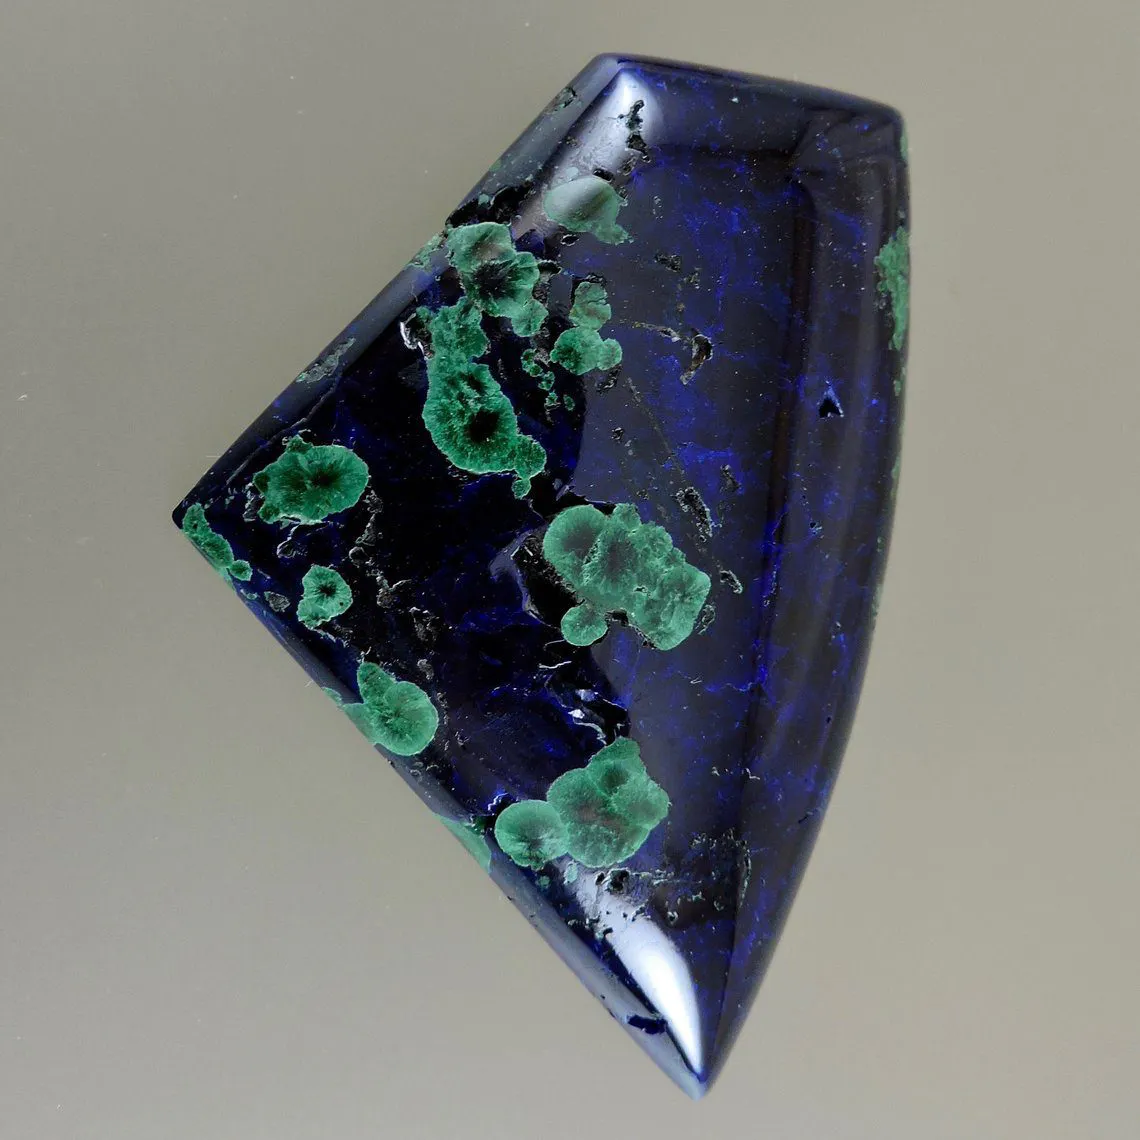 Azurite Value, Price, and Jewelry Information